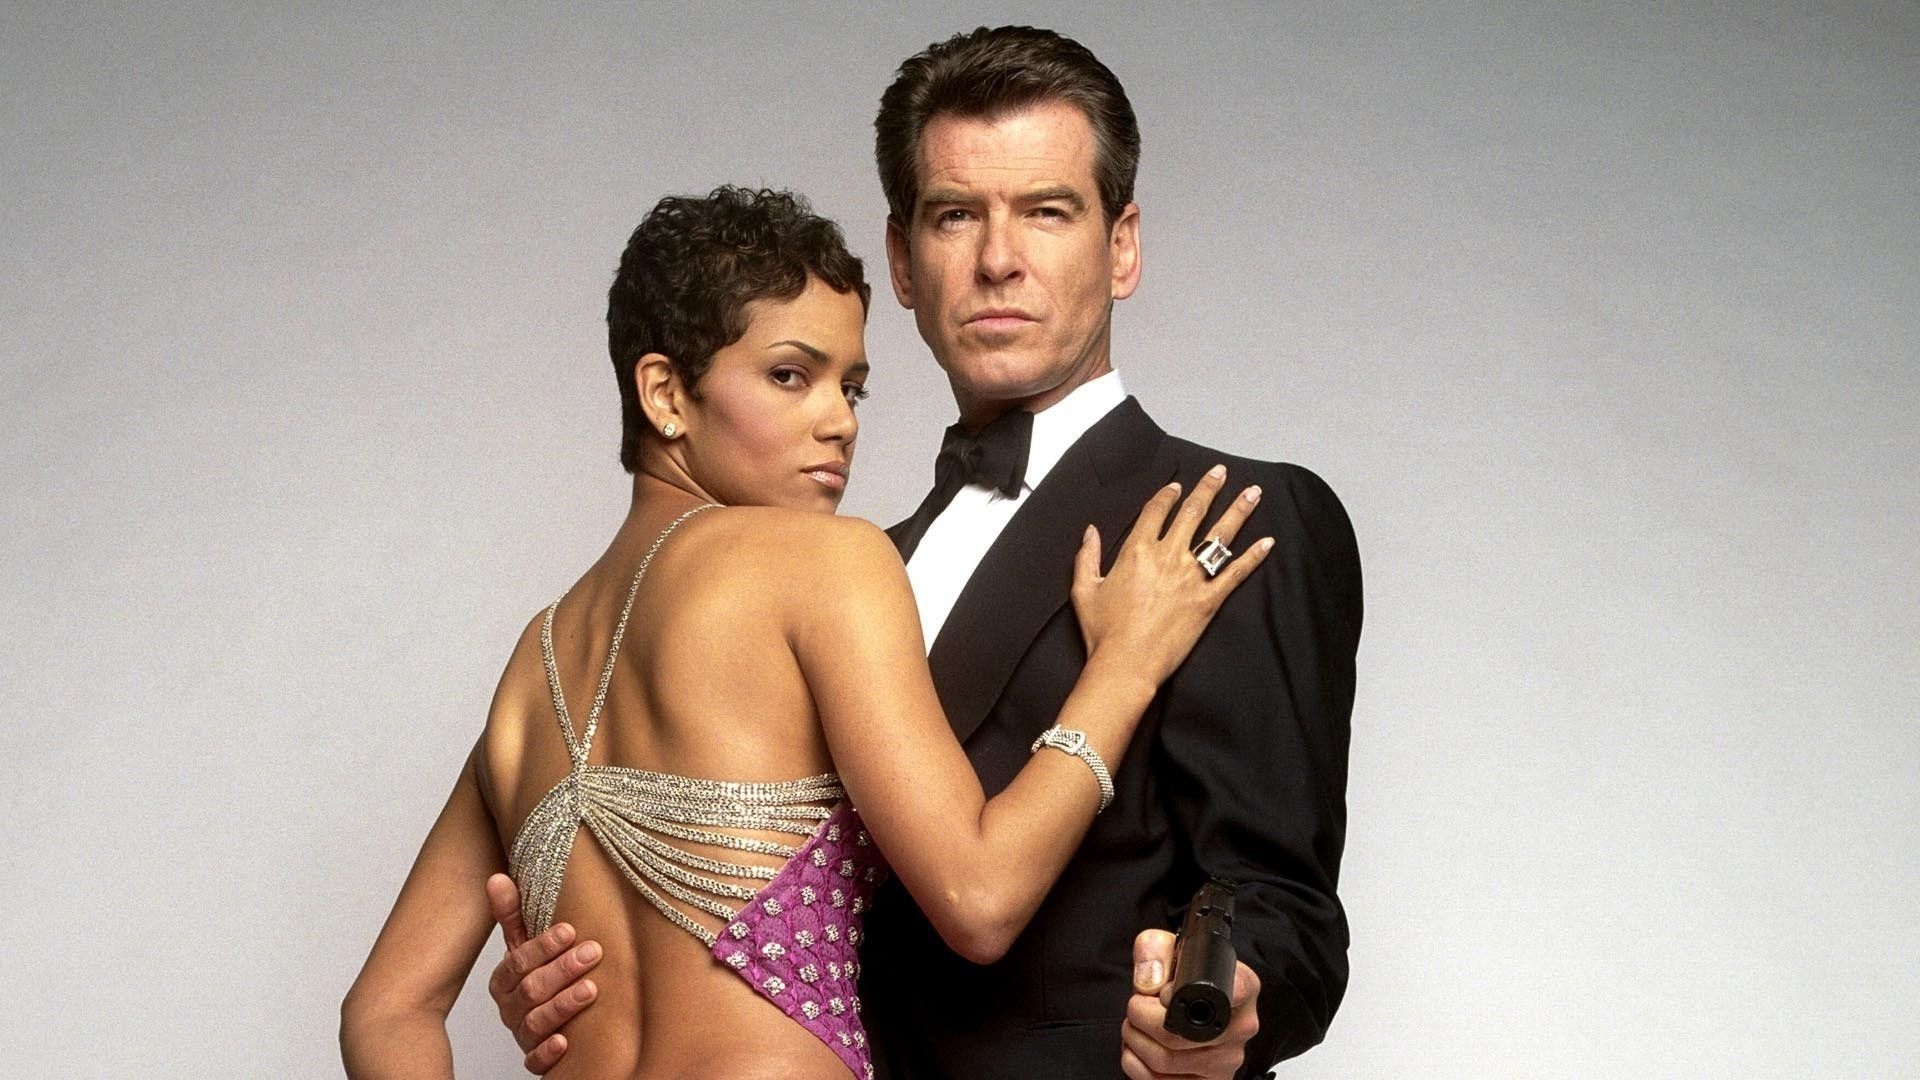 Halle Berry: Bond girl Jinx in Die Another Day. 1920x1080 Full HD Wallpaper.